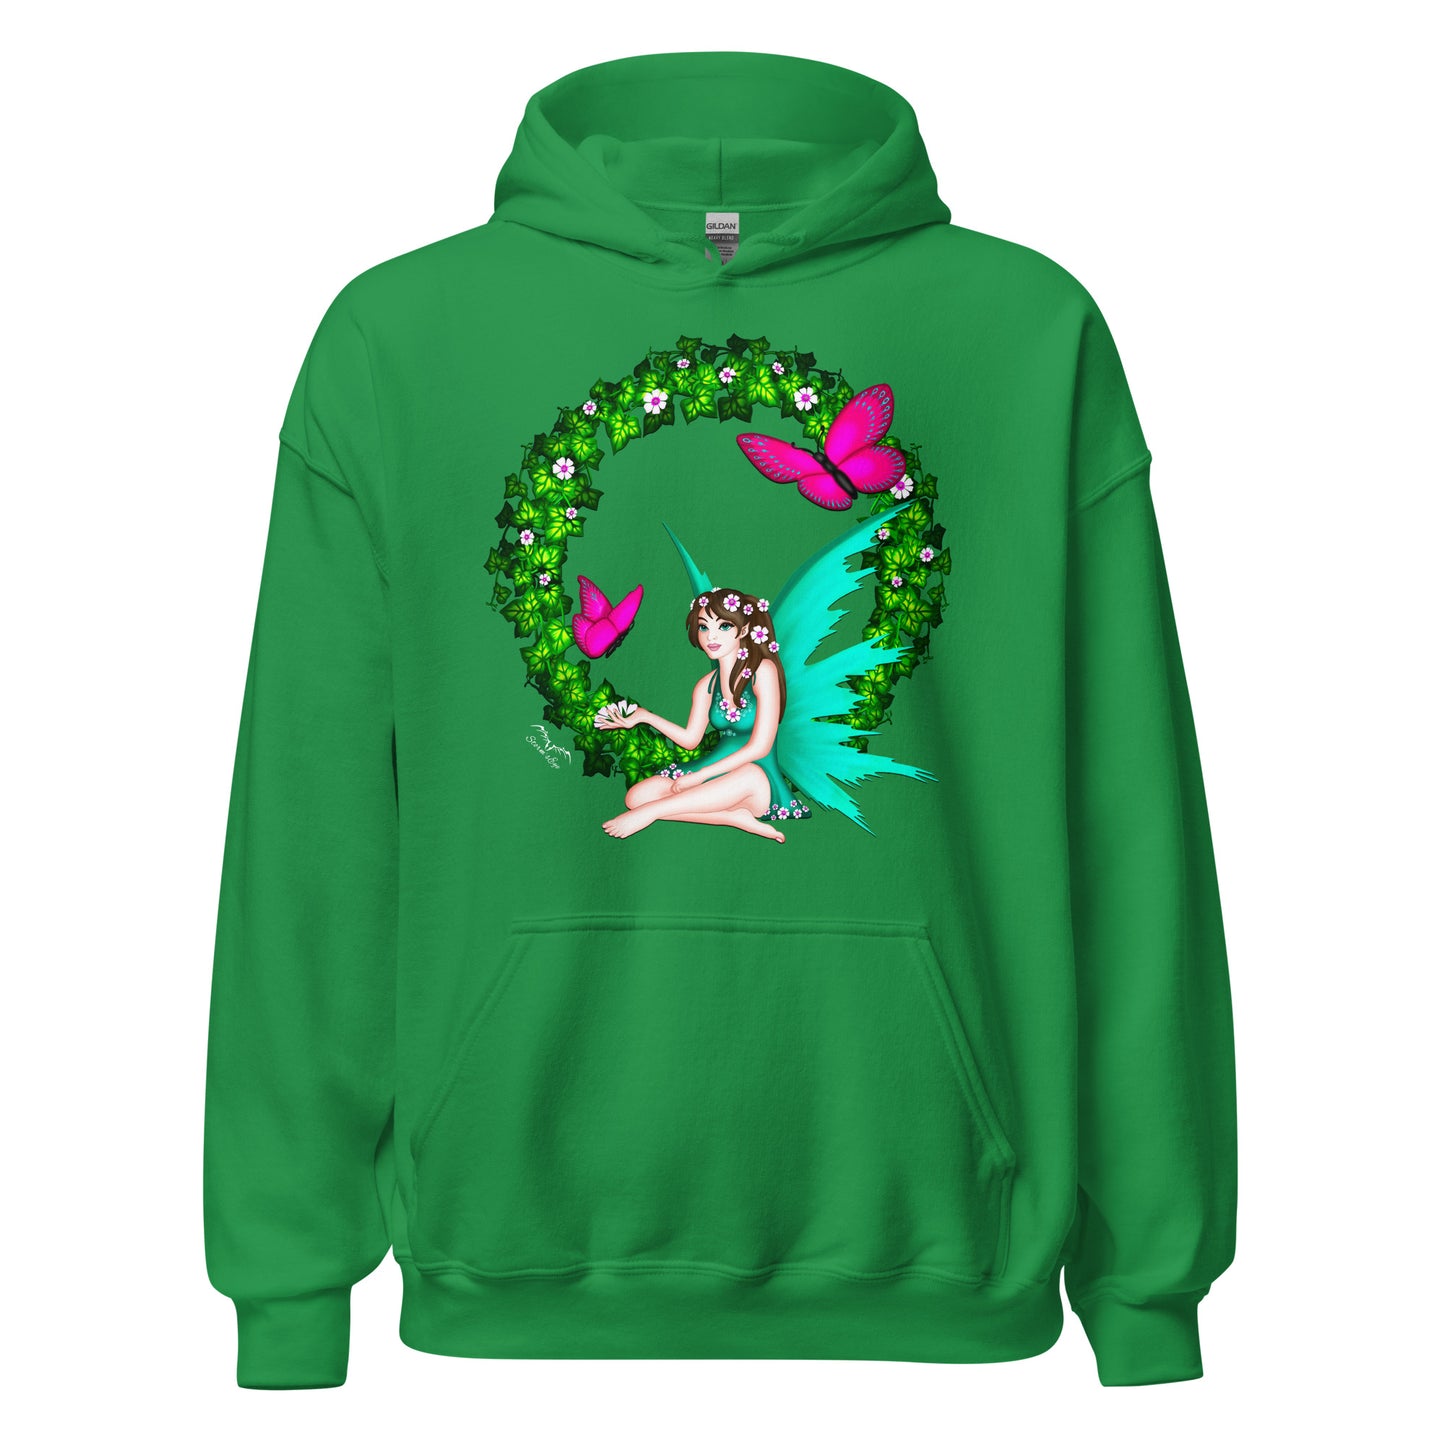 butterfly fairy hoodie bright green, by stormseye design